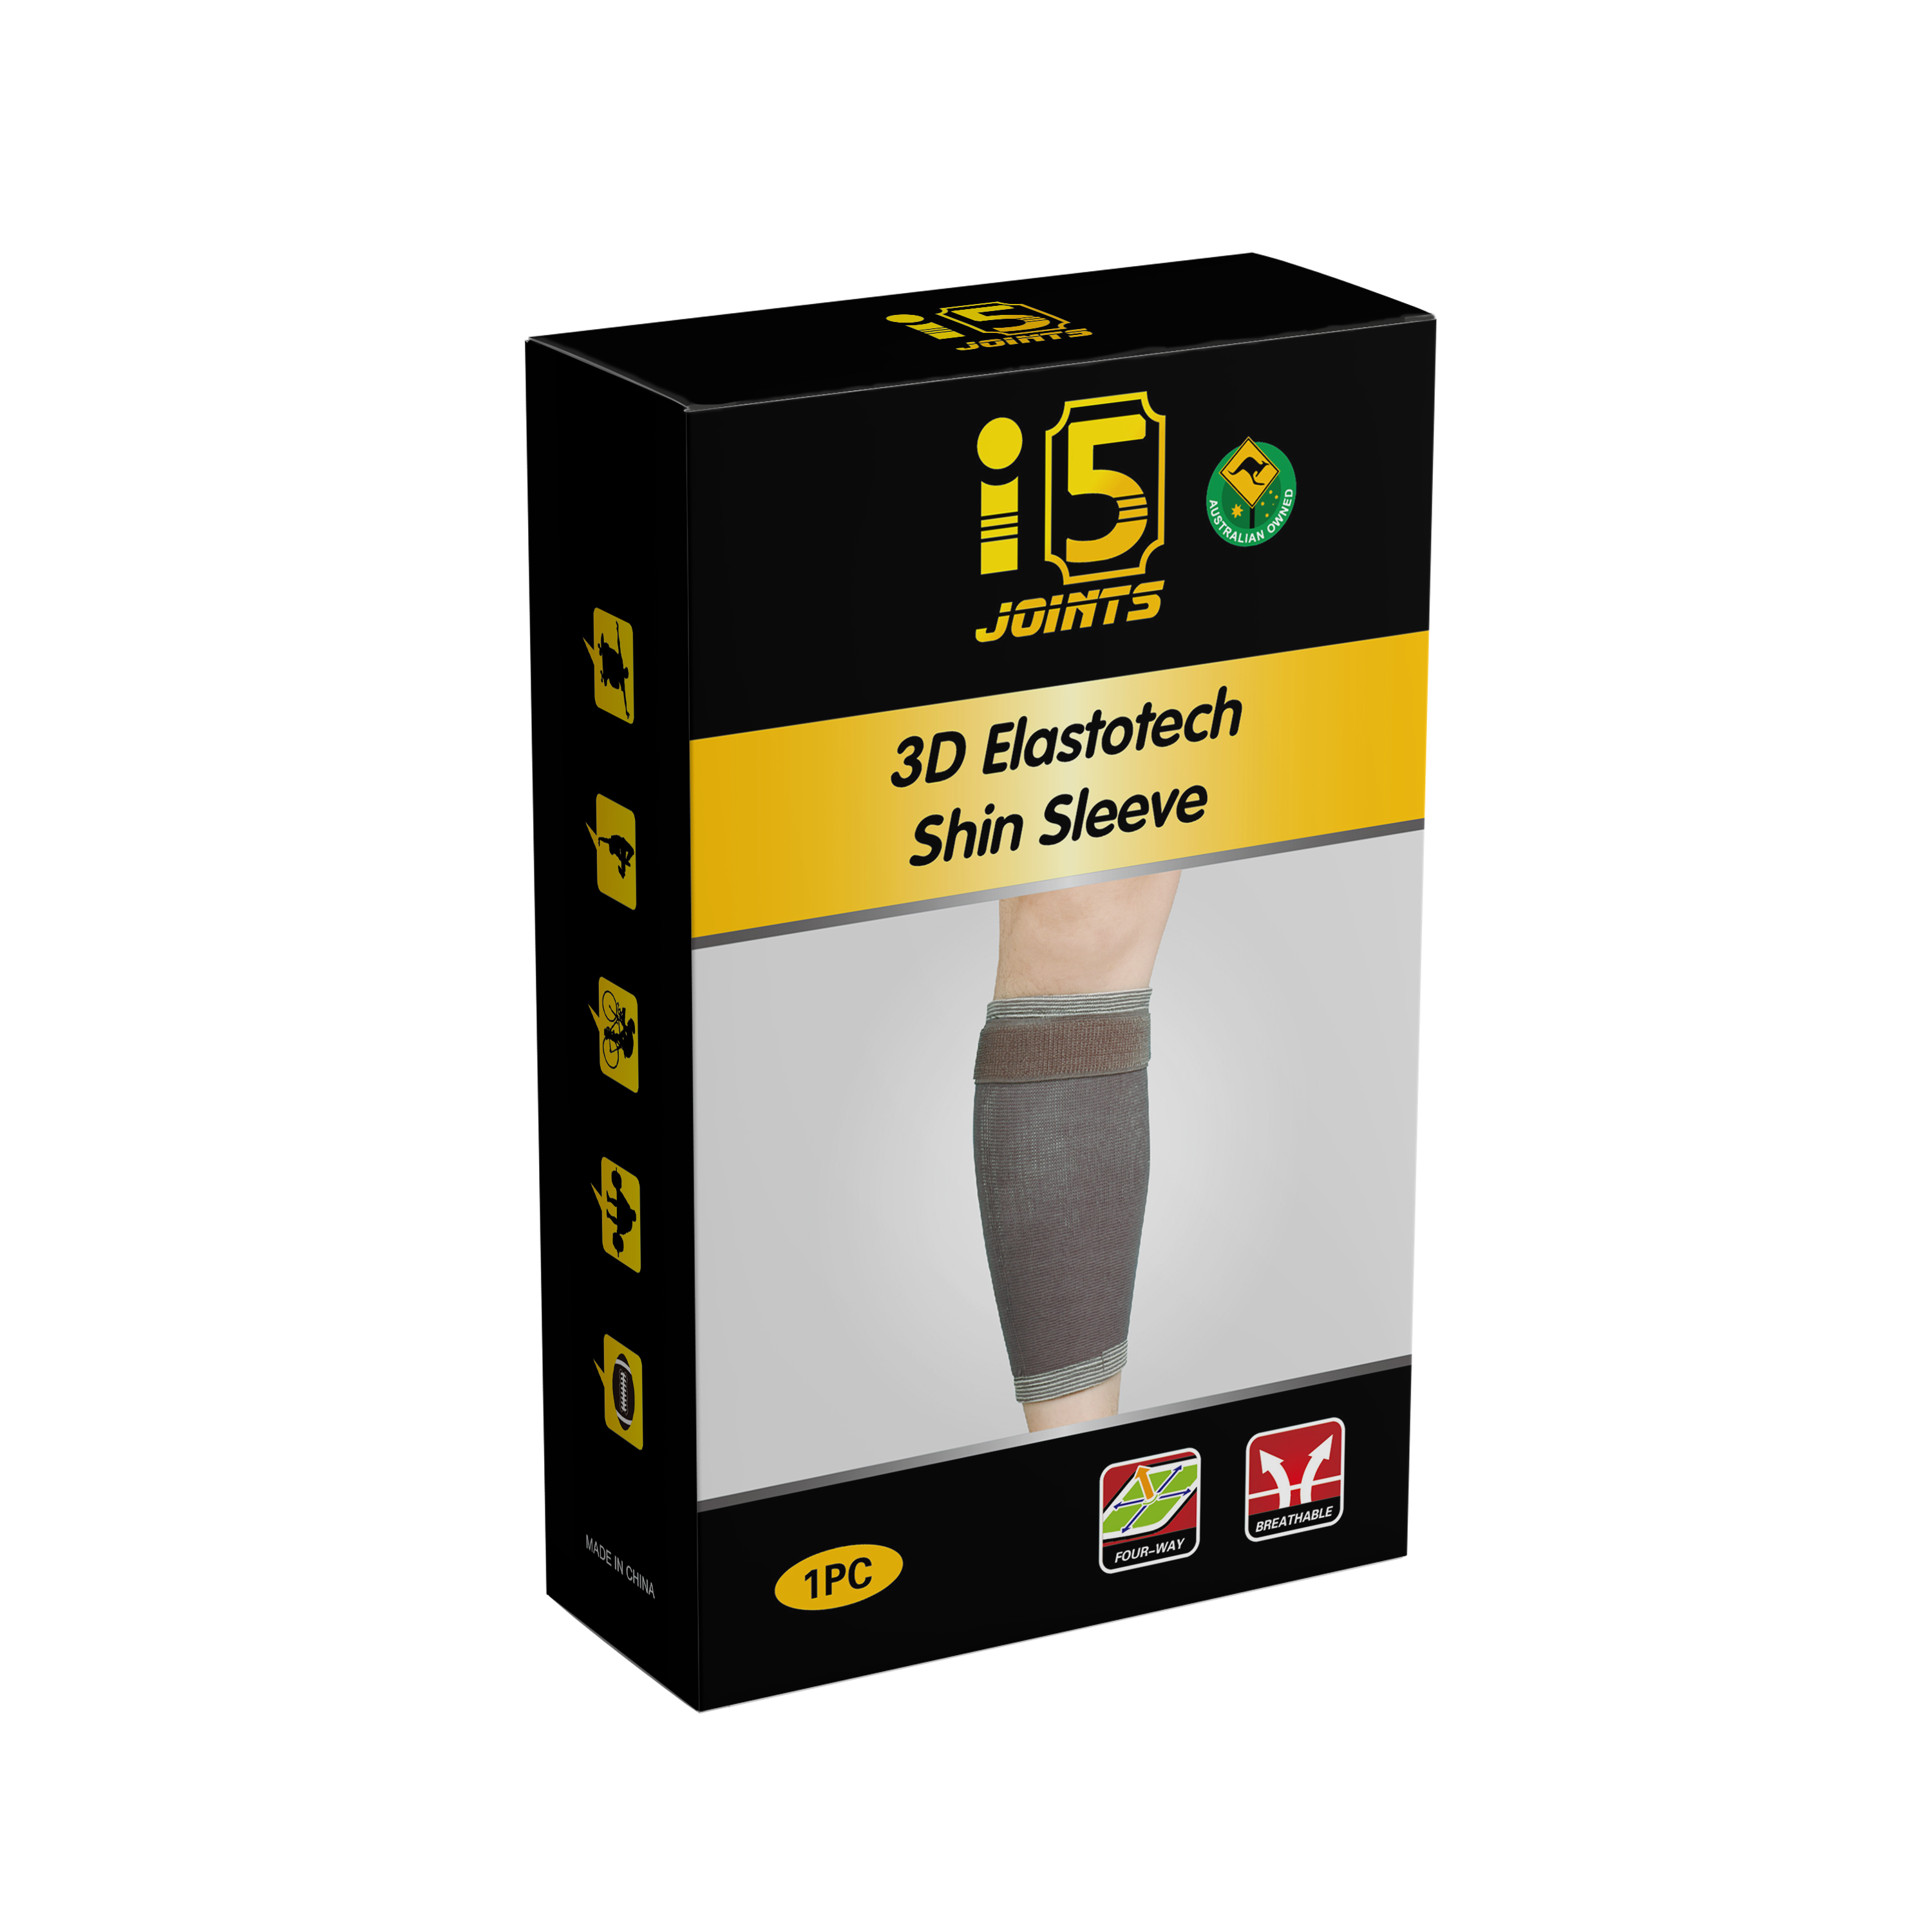 I5Joints-3D elastotech shin sleeve( Unmatched Support and Comfort for Active Lifestyles,Both men and women )